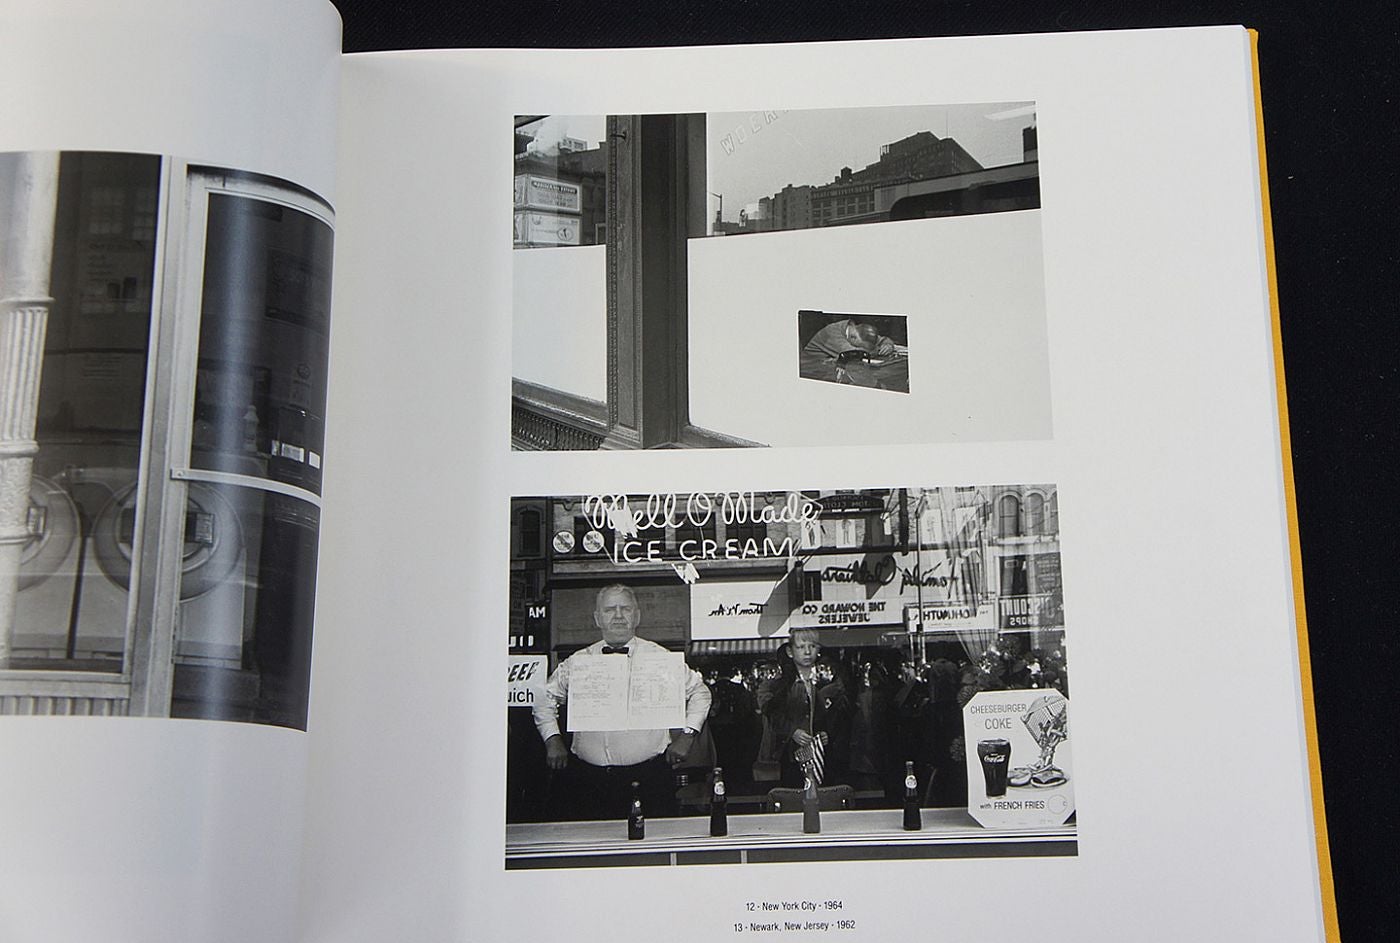 Like a One-Eyed Cat: Photographs by Lee Friedlander 1956-1987 (Special Limited Edition with 10 Photogravure Prints)